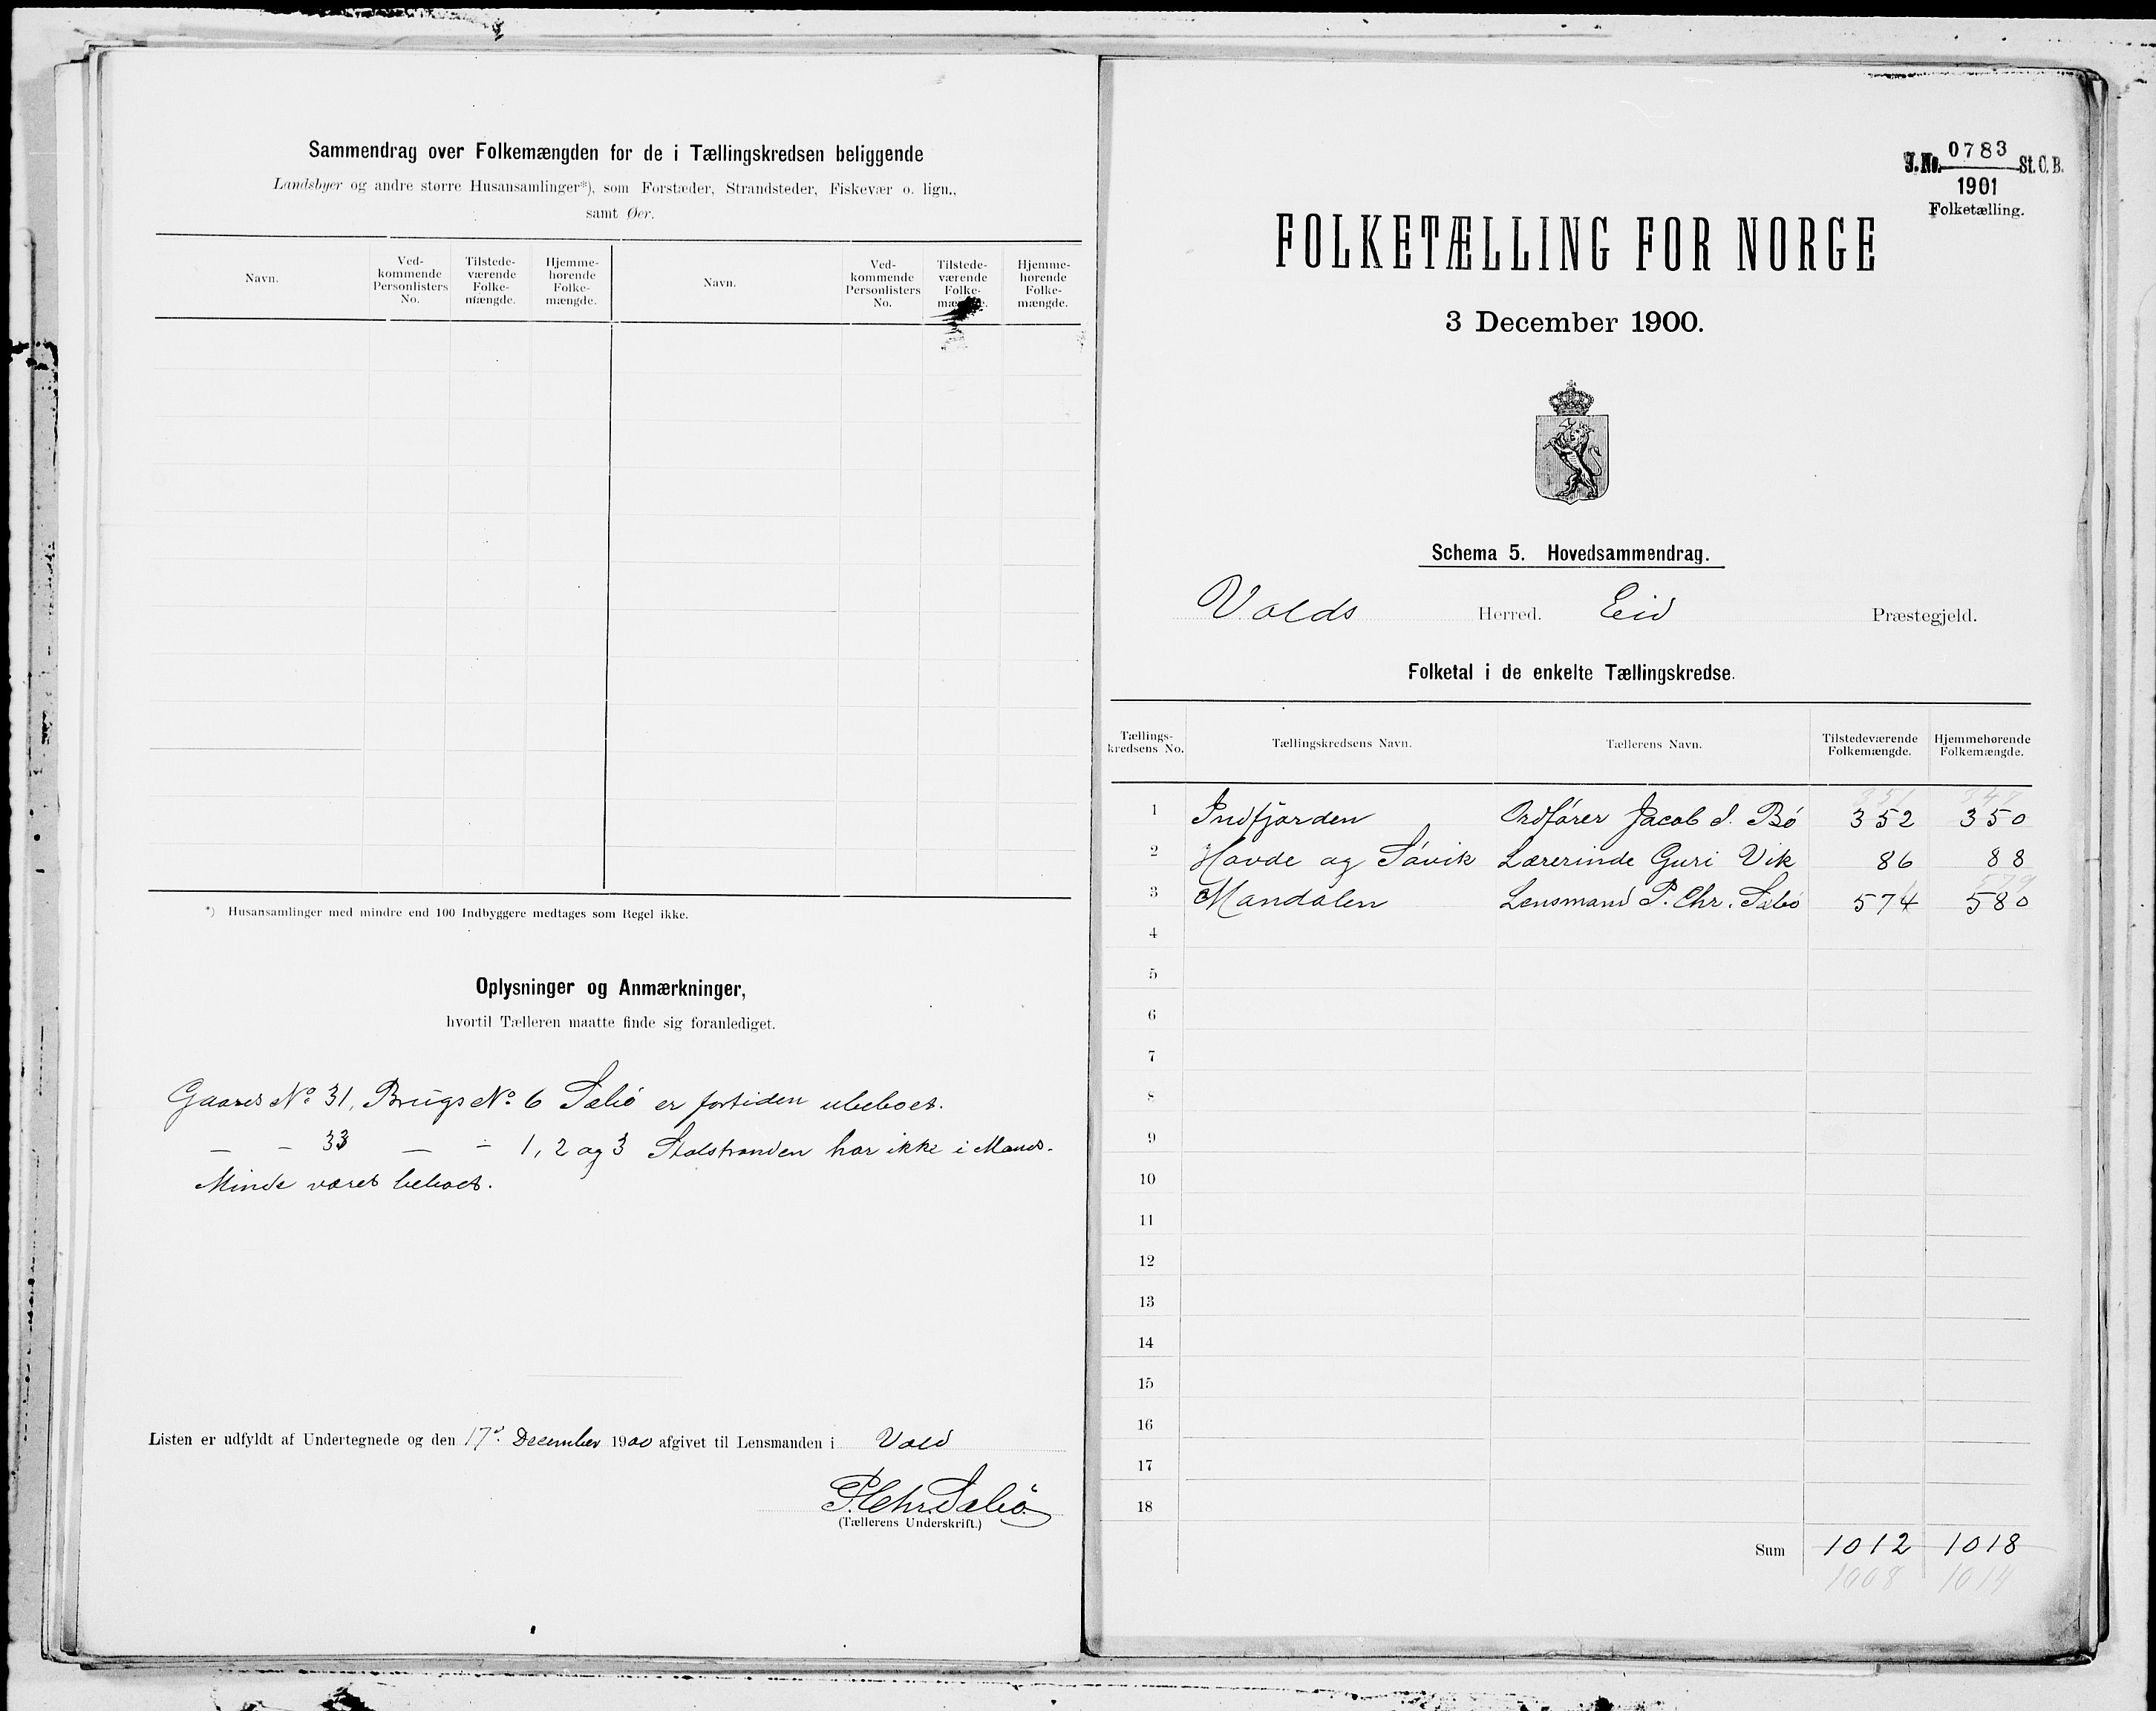 SAT, 1900 census for Voll, 1900, p. 8